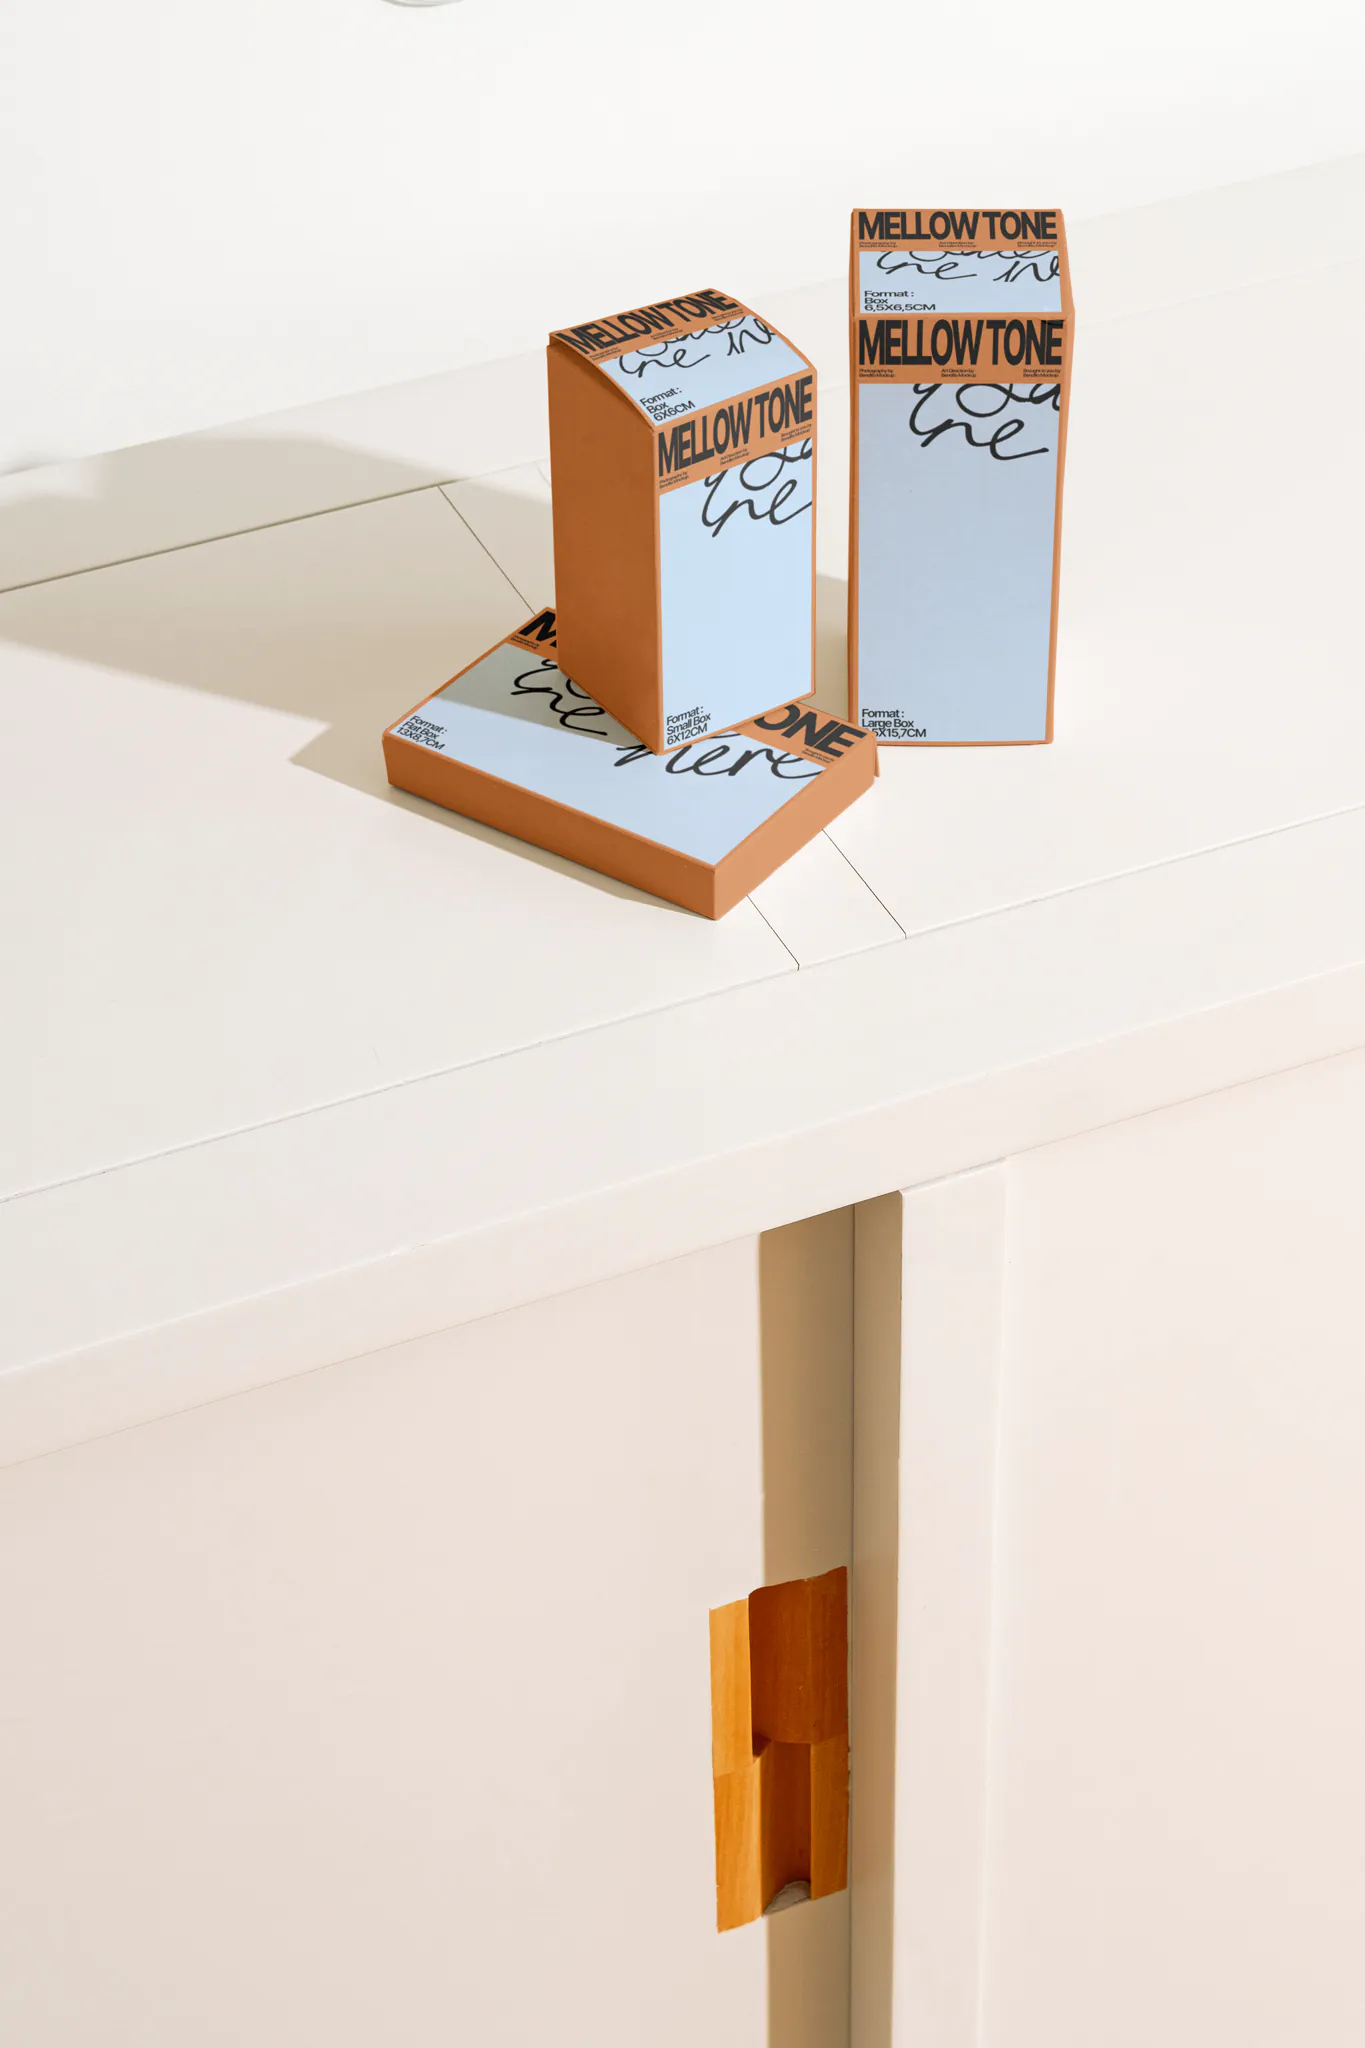 Box mockup laying on a white wooden surface. Piles of boxes mockup resting on each other with a beautiful background. Sophisticated packaging mockup laying on a wooden cabinet, mid-century inspired.